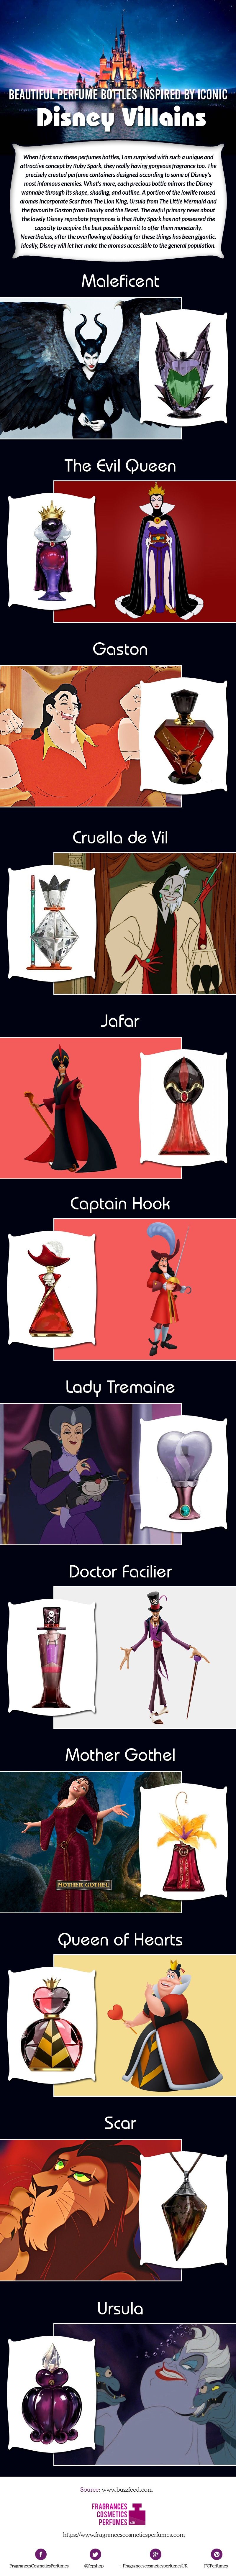 beautiful-perfume-bottles-inspired-by-iconic-disney-villains